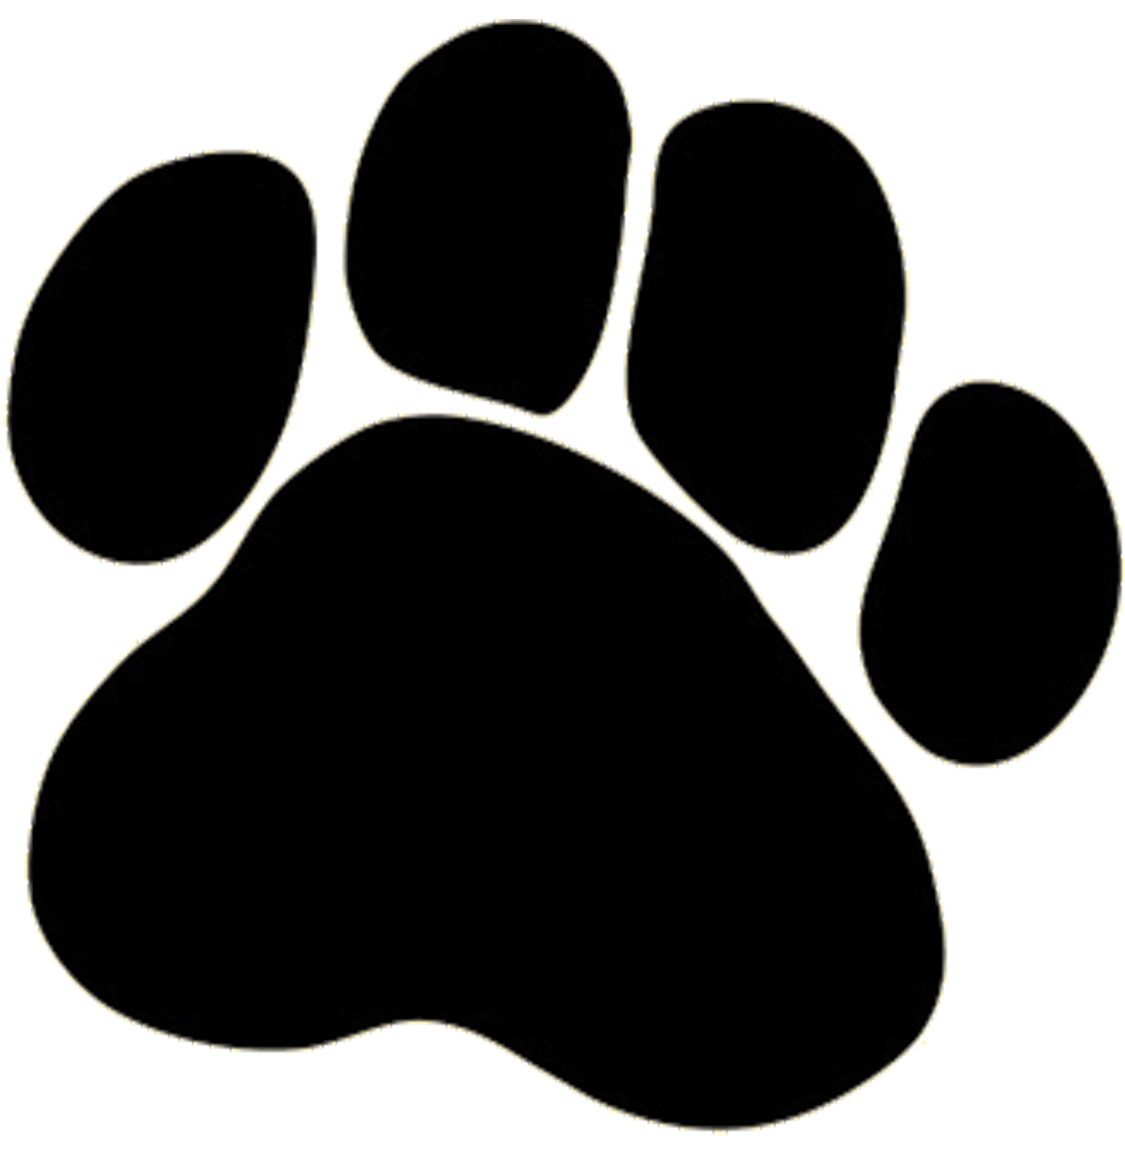 Dog paw border clipart free images 2